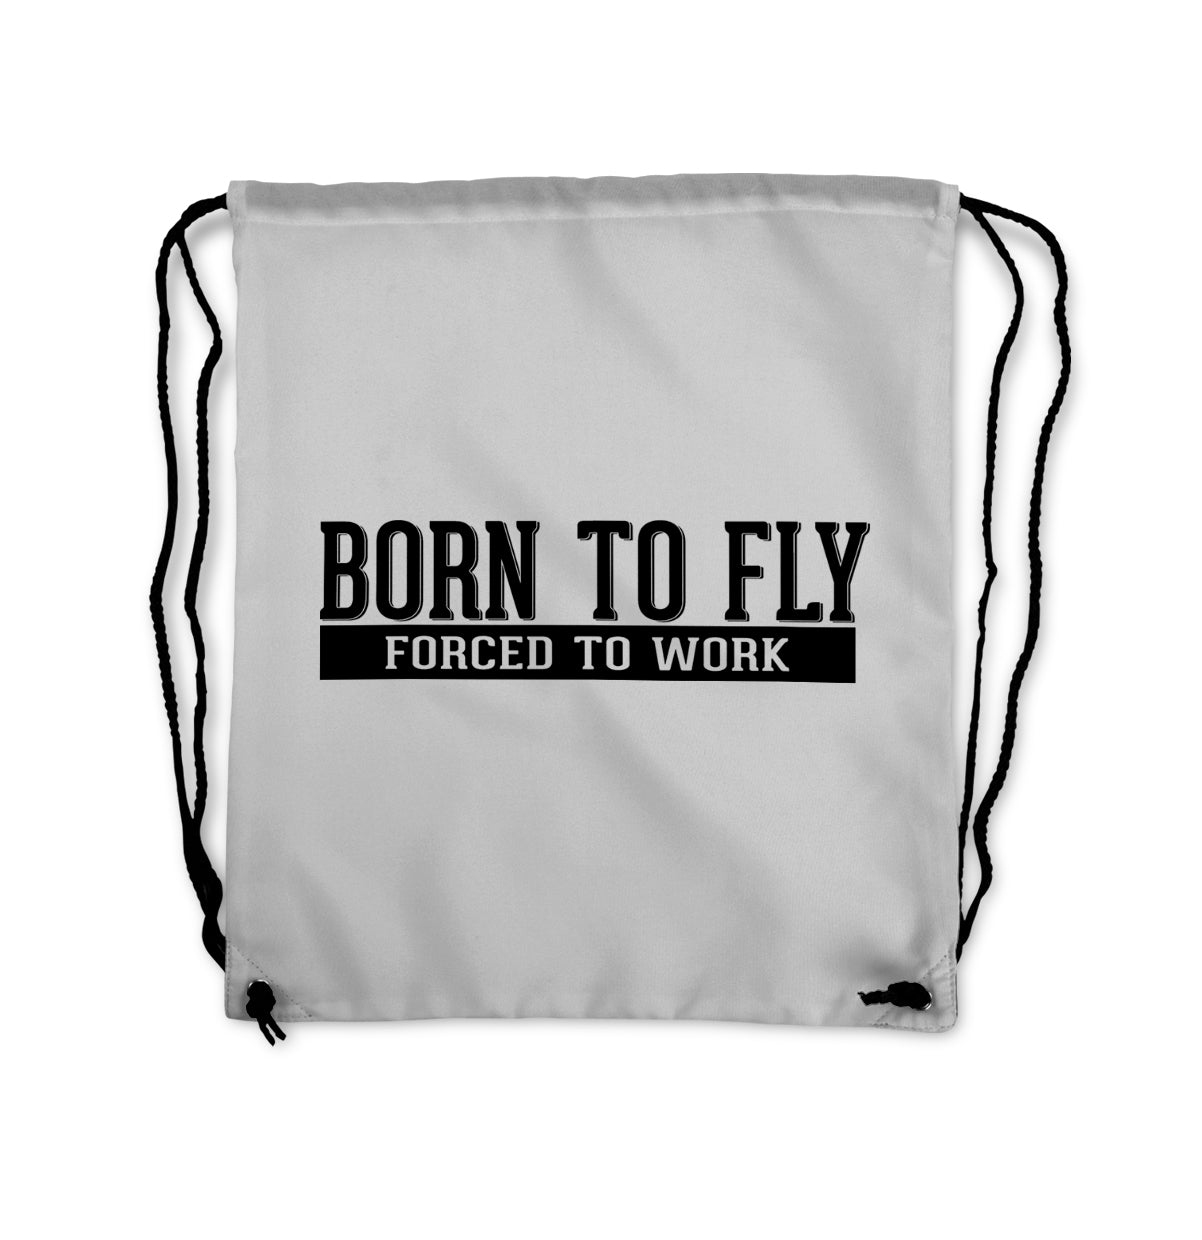 Born To Fly Forced To Work Designed Drawstring Bags